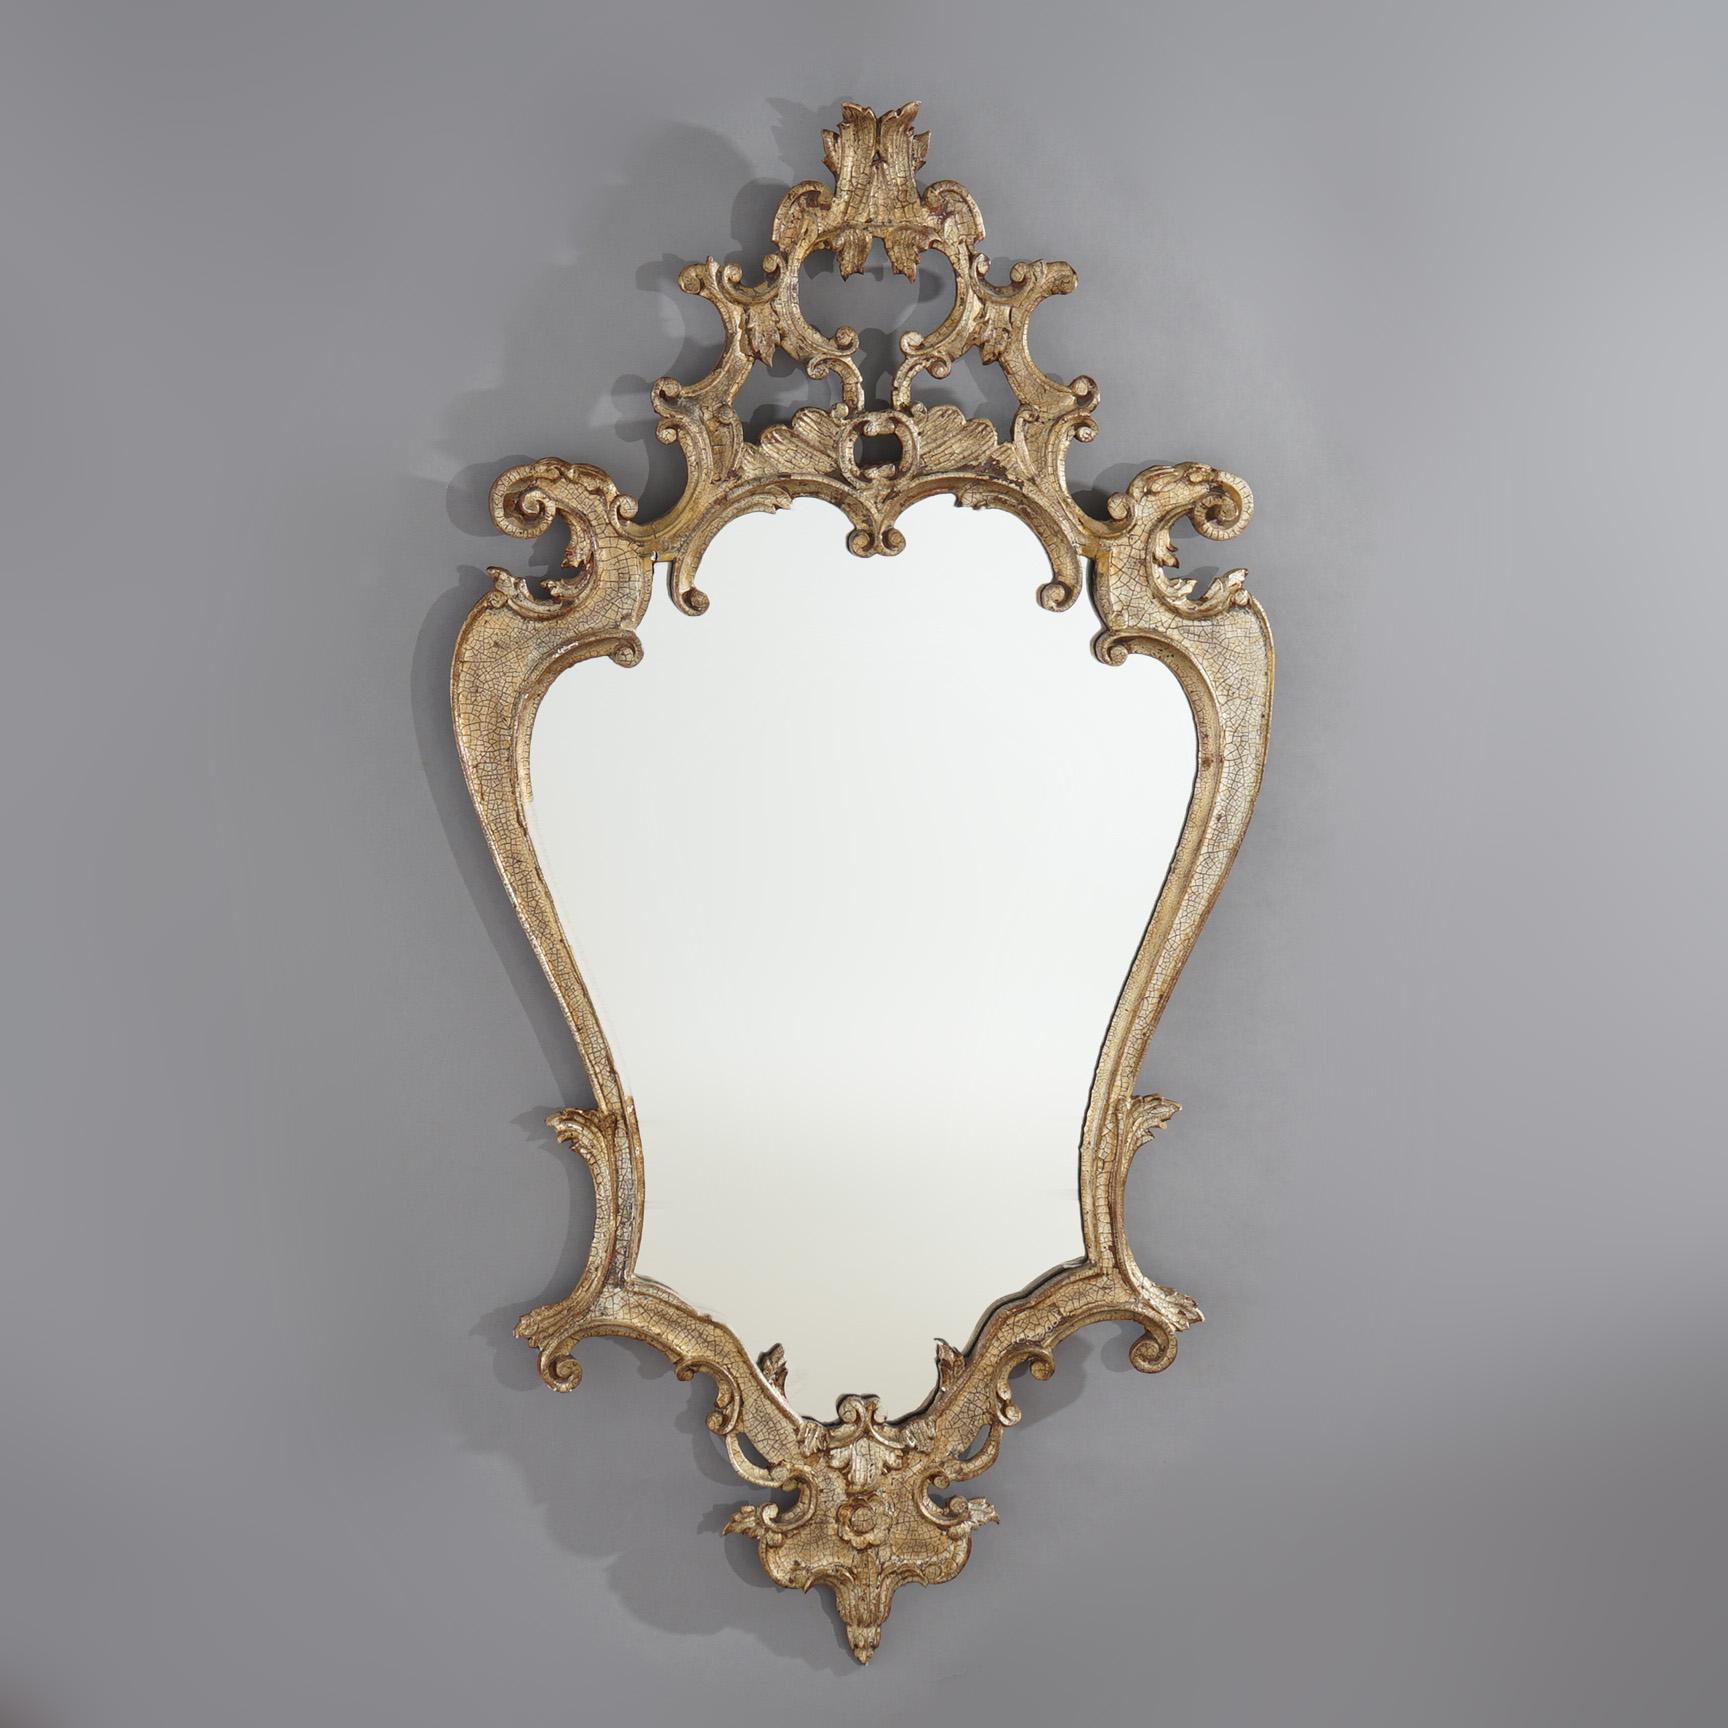 20th Century Antique French Louis XIV Giltwood Scroll & Foliate Form Shaped Wall Mirror C1920 For Sale